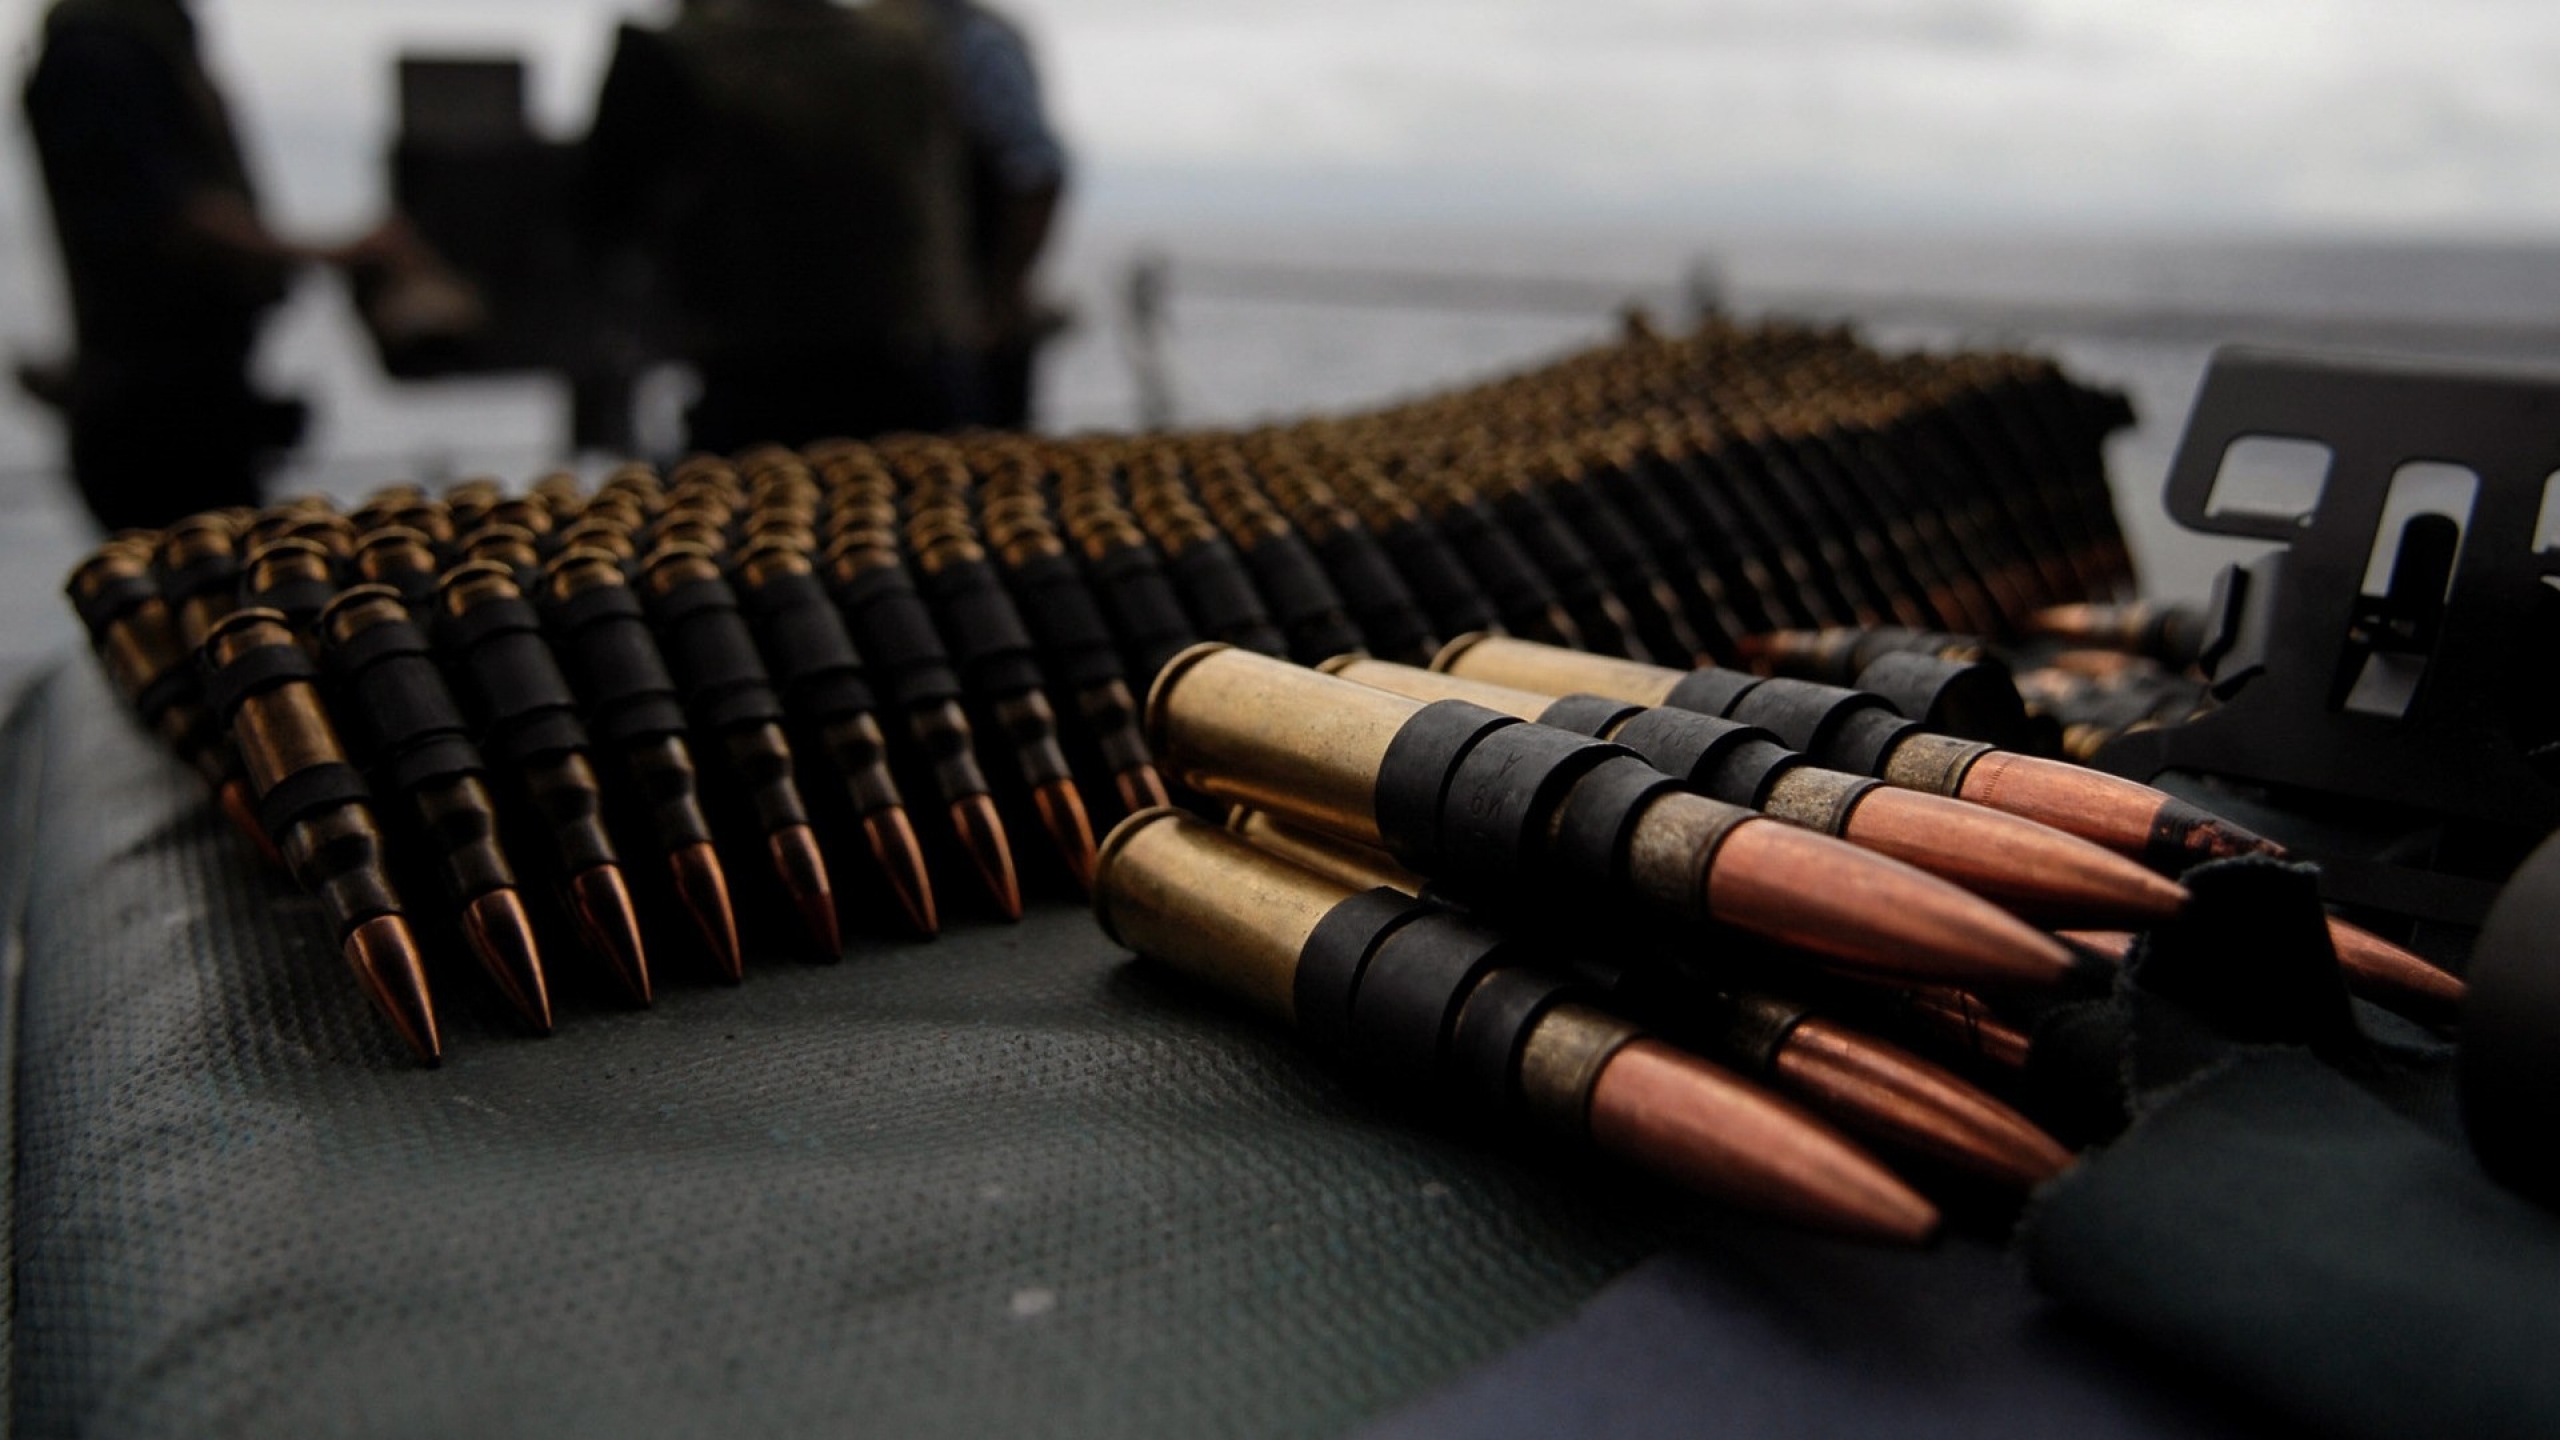 weapons, bullet, ammo, military